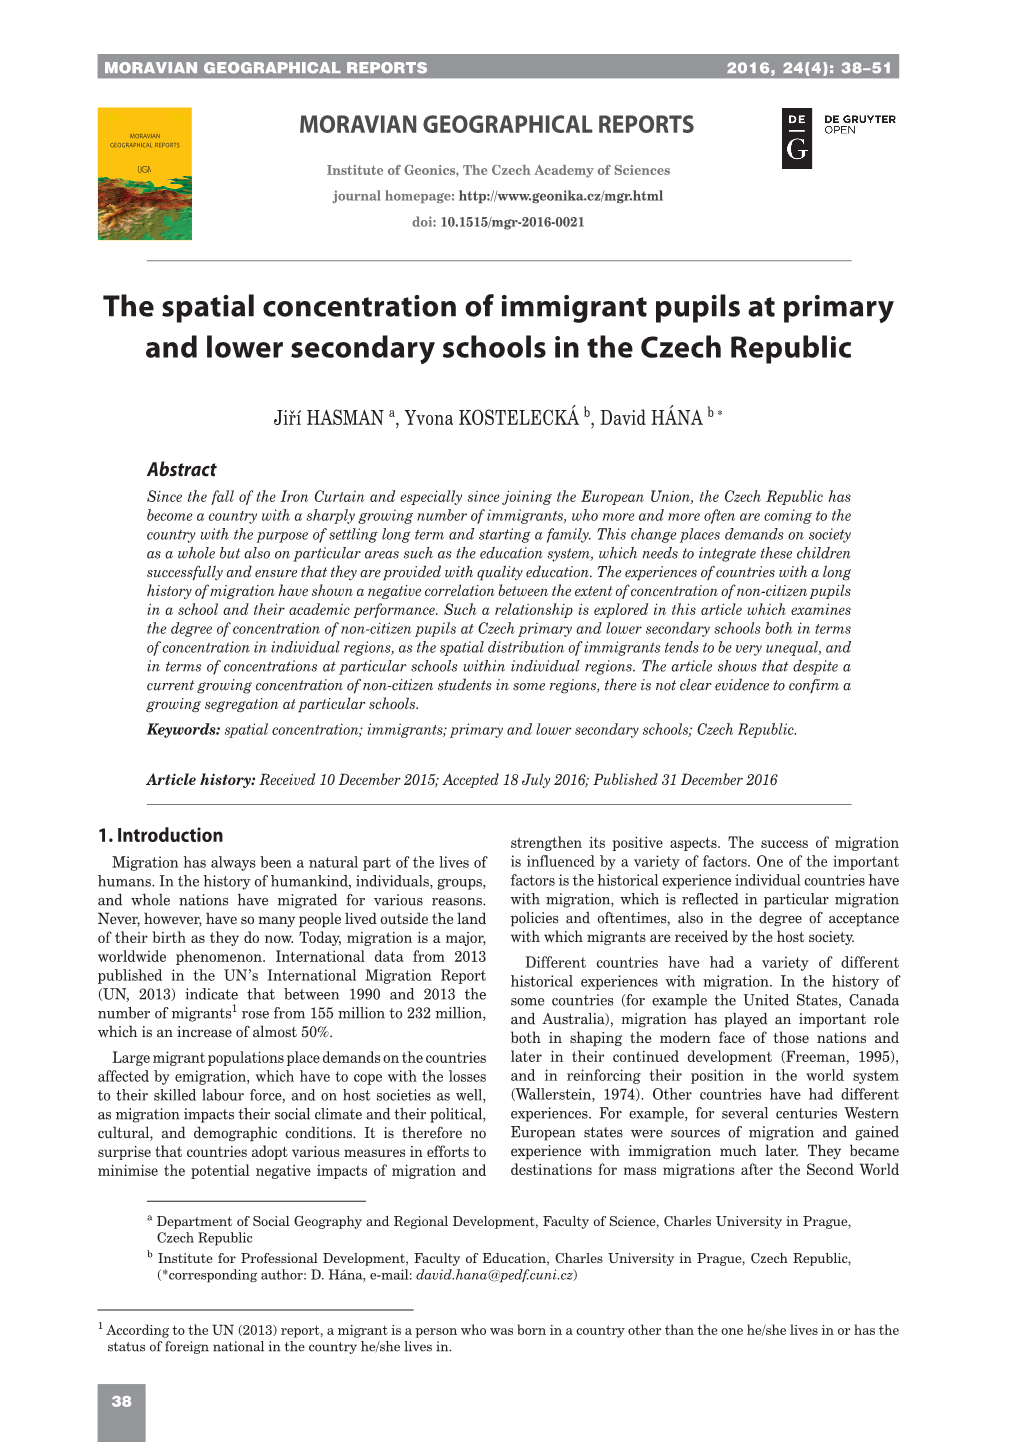 The Spatial Concentration of Immigrant Pupils at Primary and Lower Secondary Schools in the Czech Republic